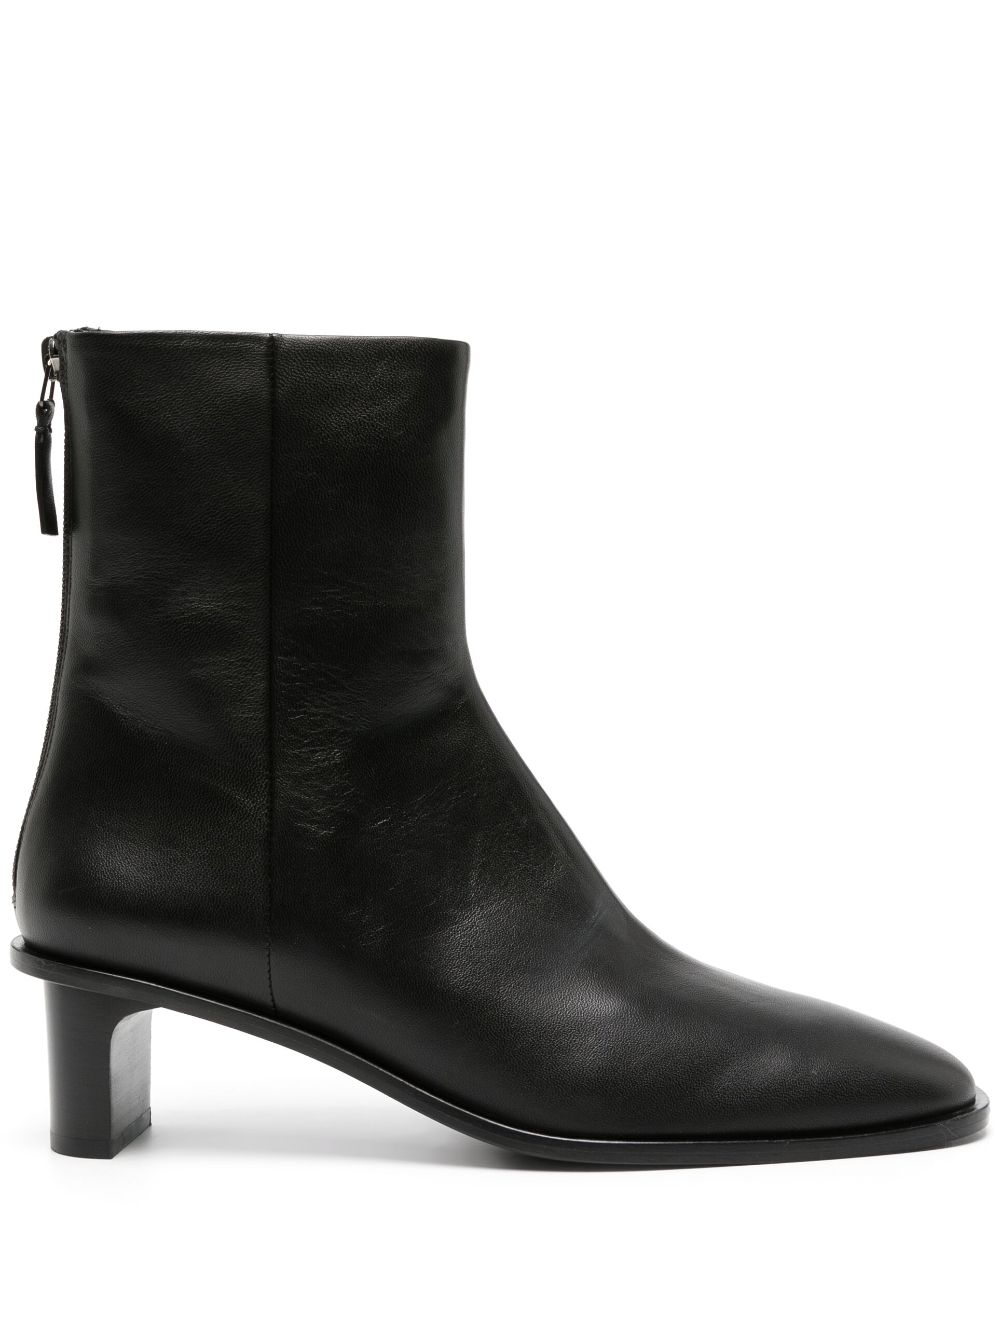 A.EMERY Soma 60mm leather ankle boot - Black von A.EMERY